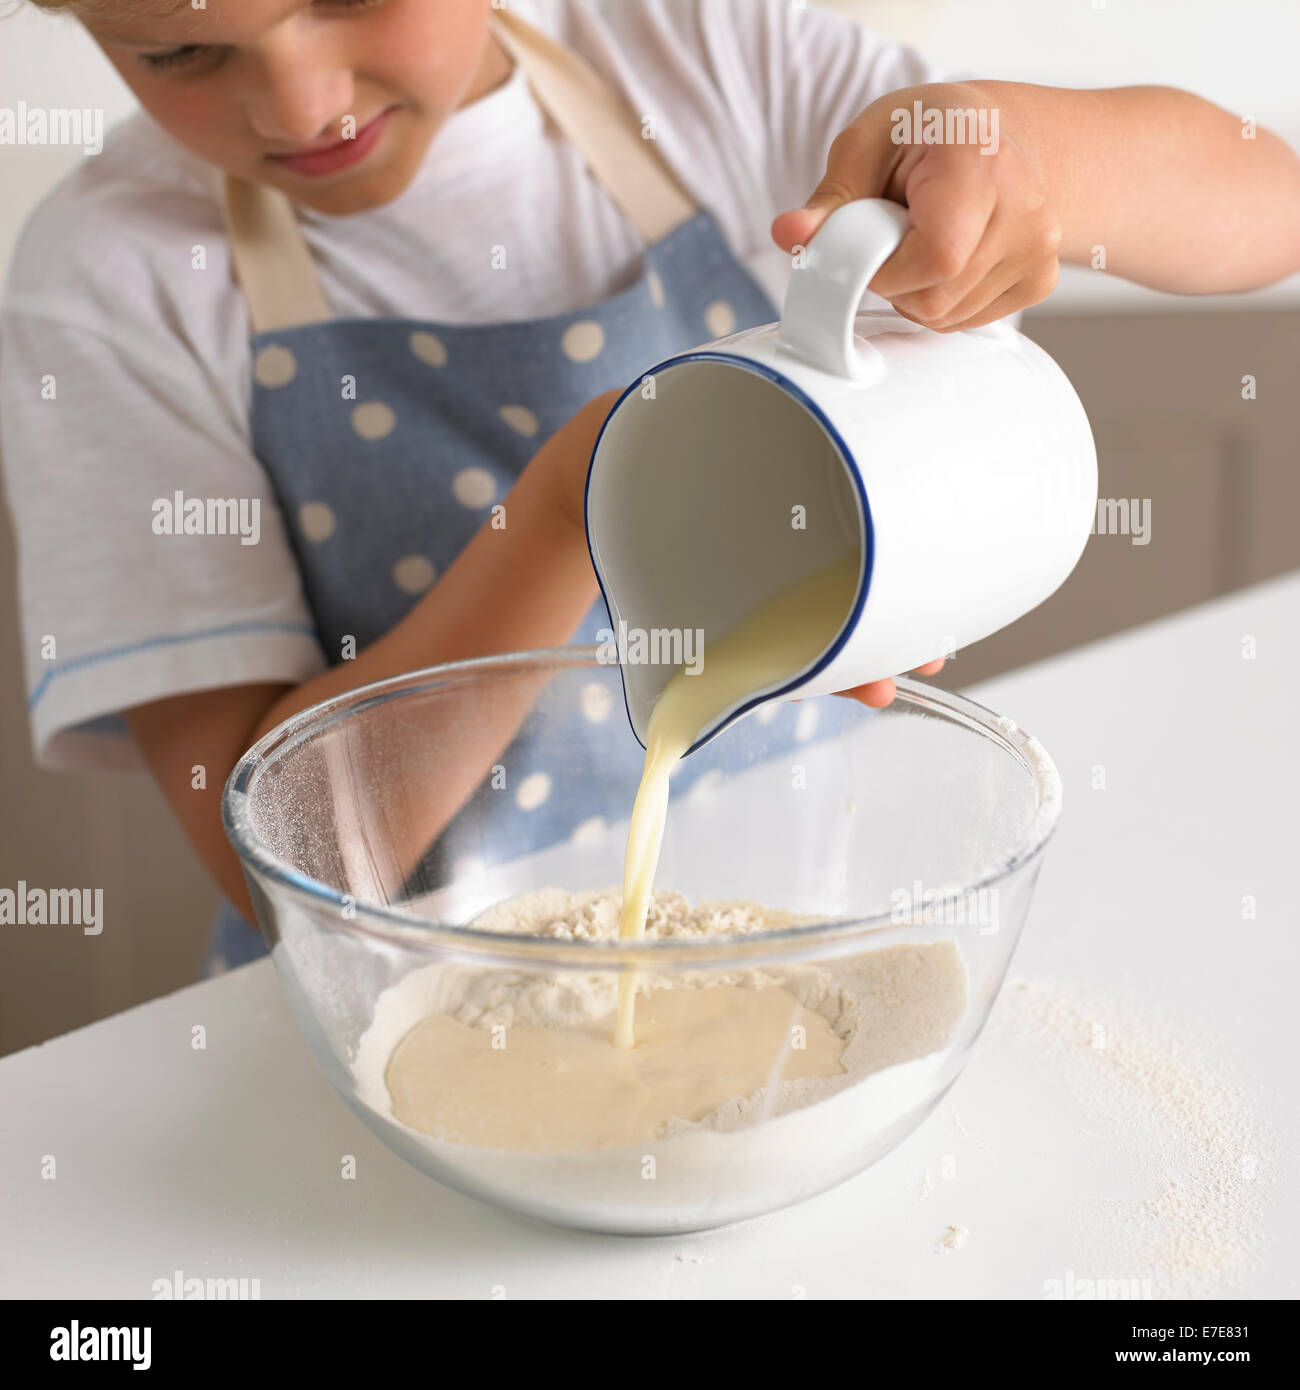 young boy 6-7 years pouring milk into flour to make batter for pancakes Stock Photo